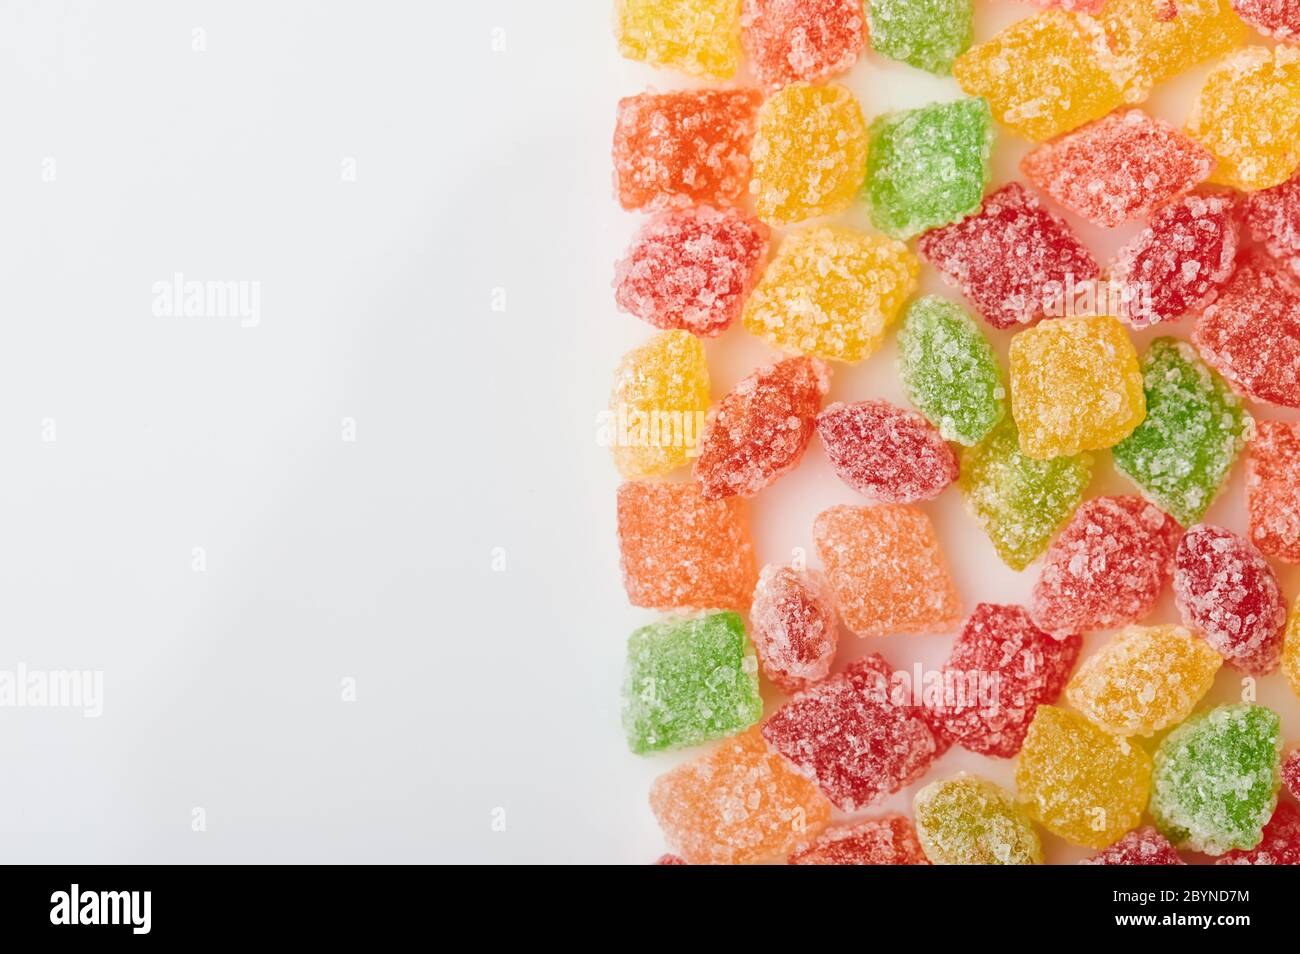 Sugary candy theme. Colorful delicious junk food Stock Photo